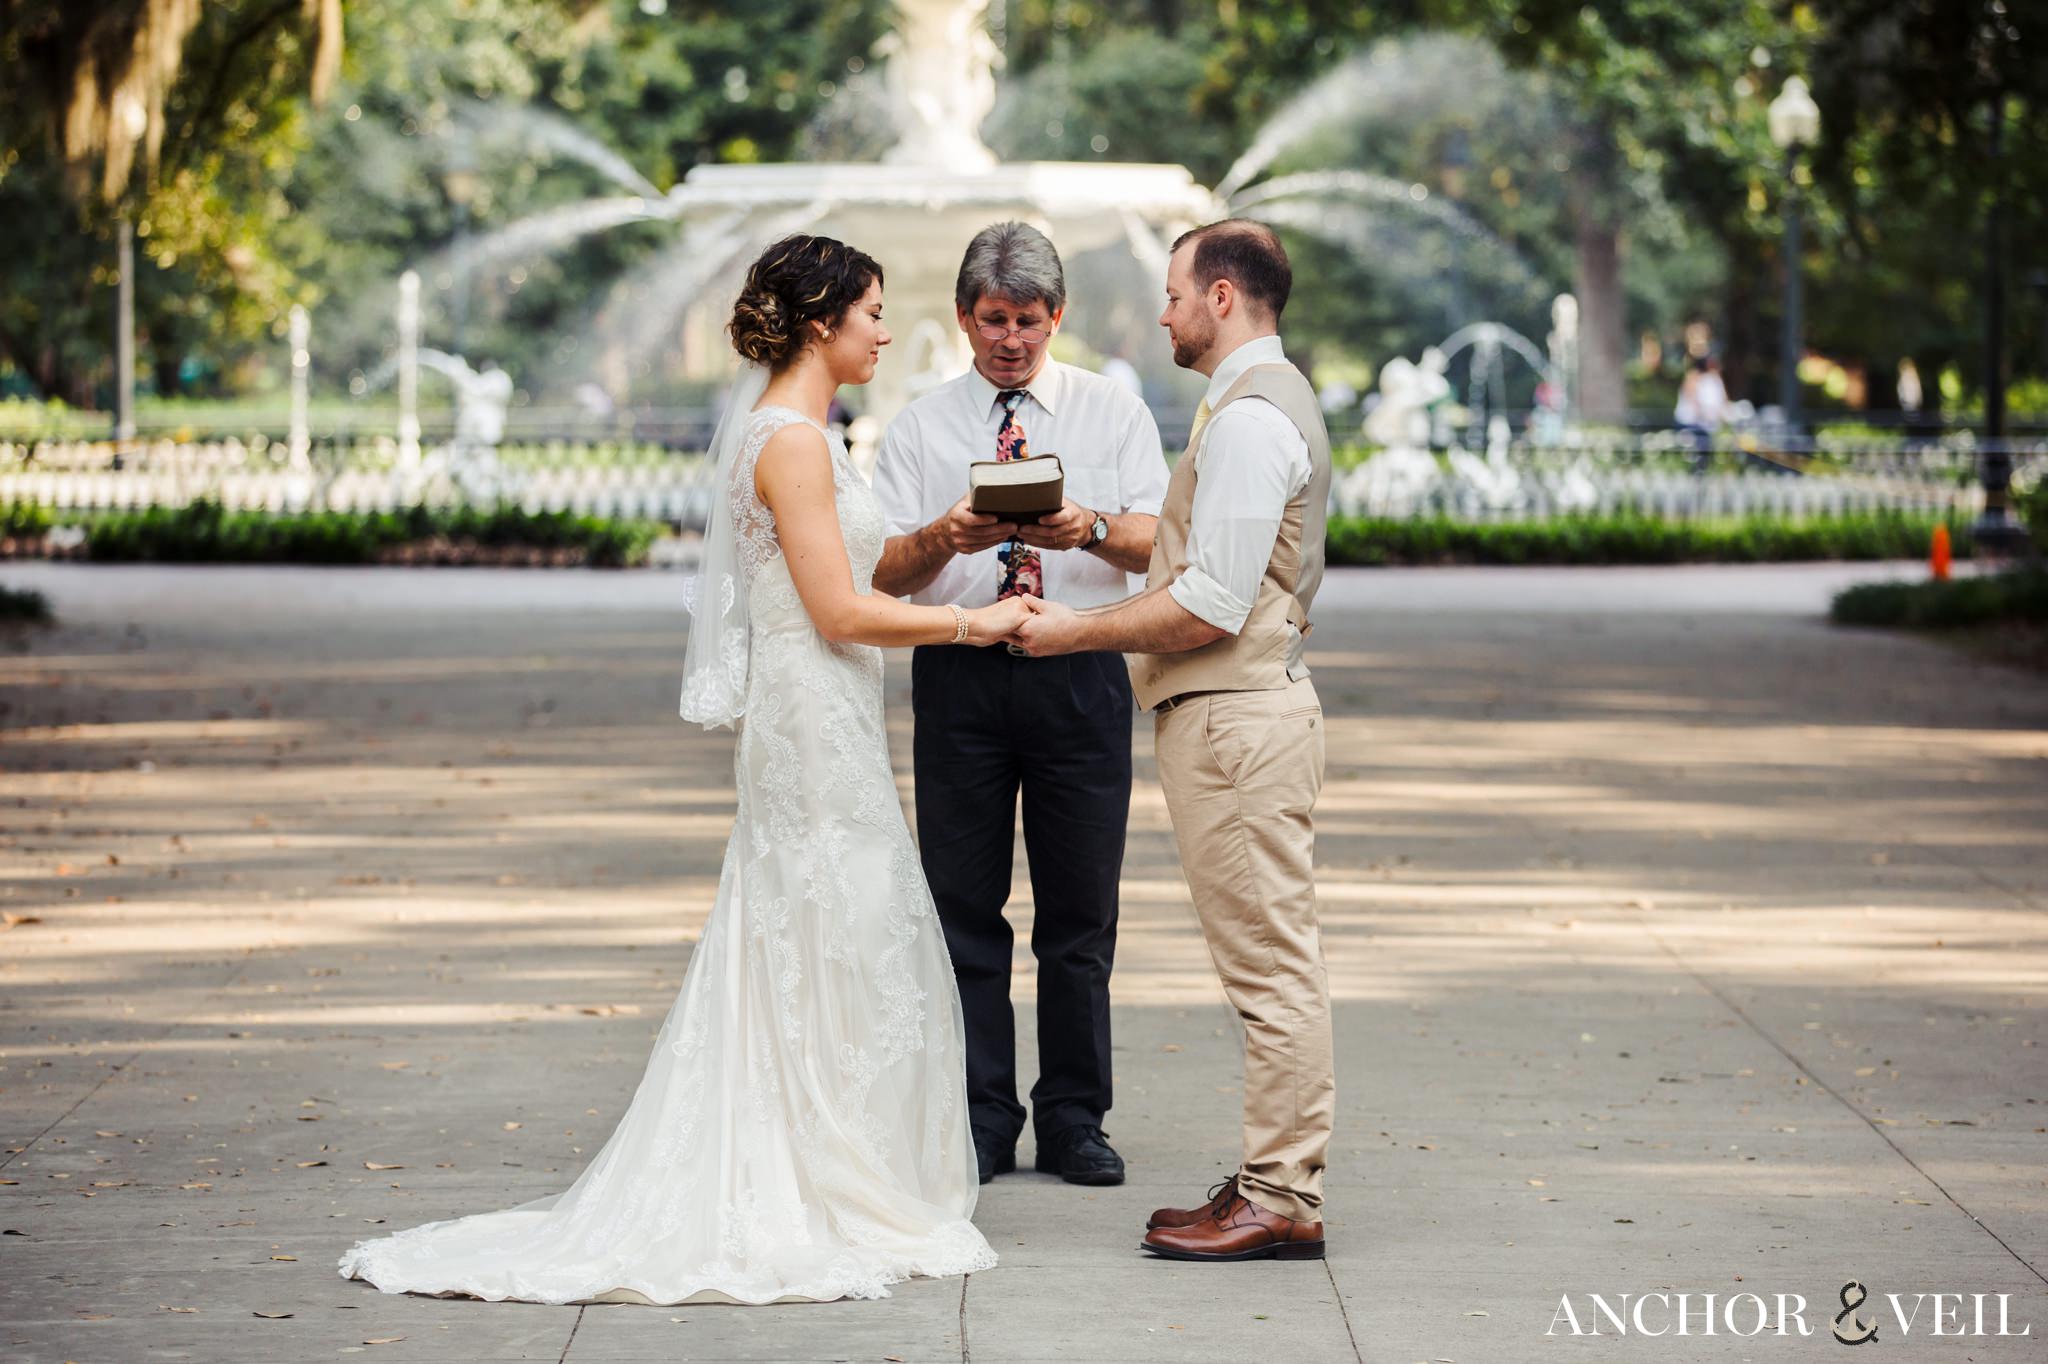 ceremony location in the park during their Forsyth Park Wedding Elopement